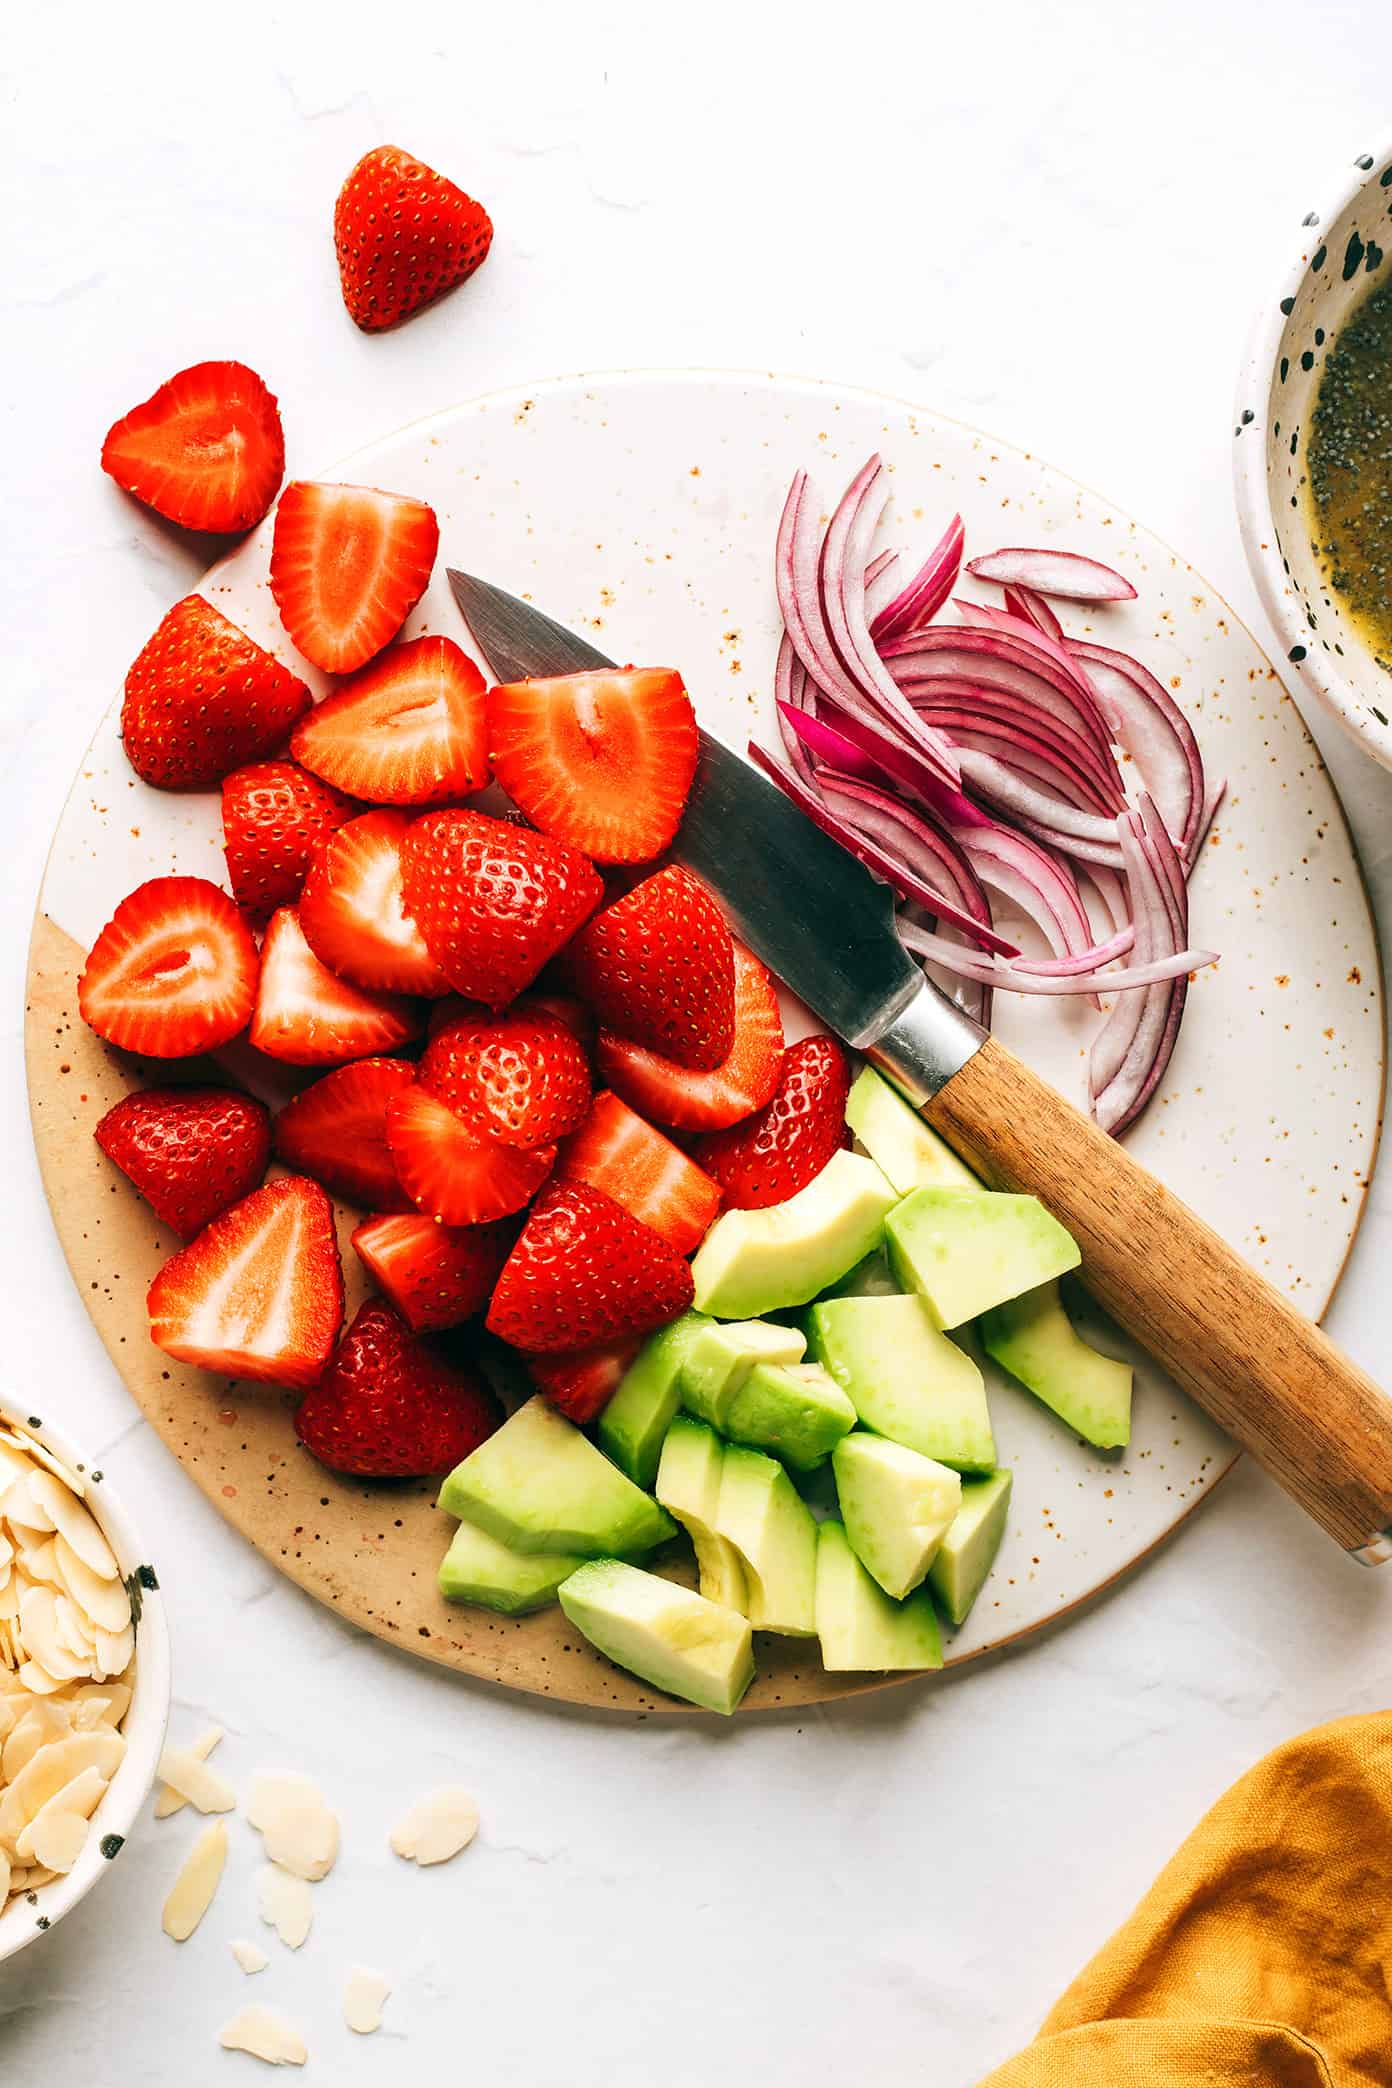 Cut strawberries, avocado and red onion